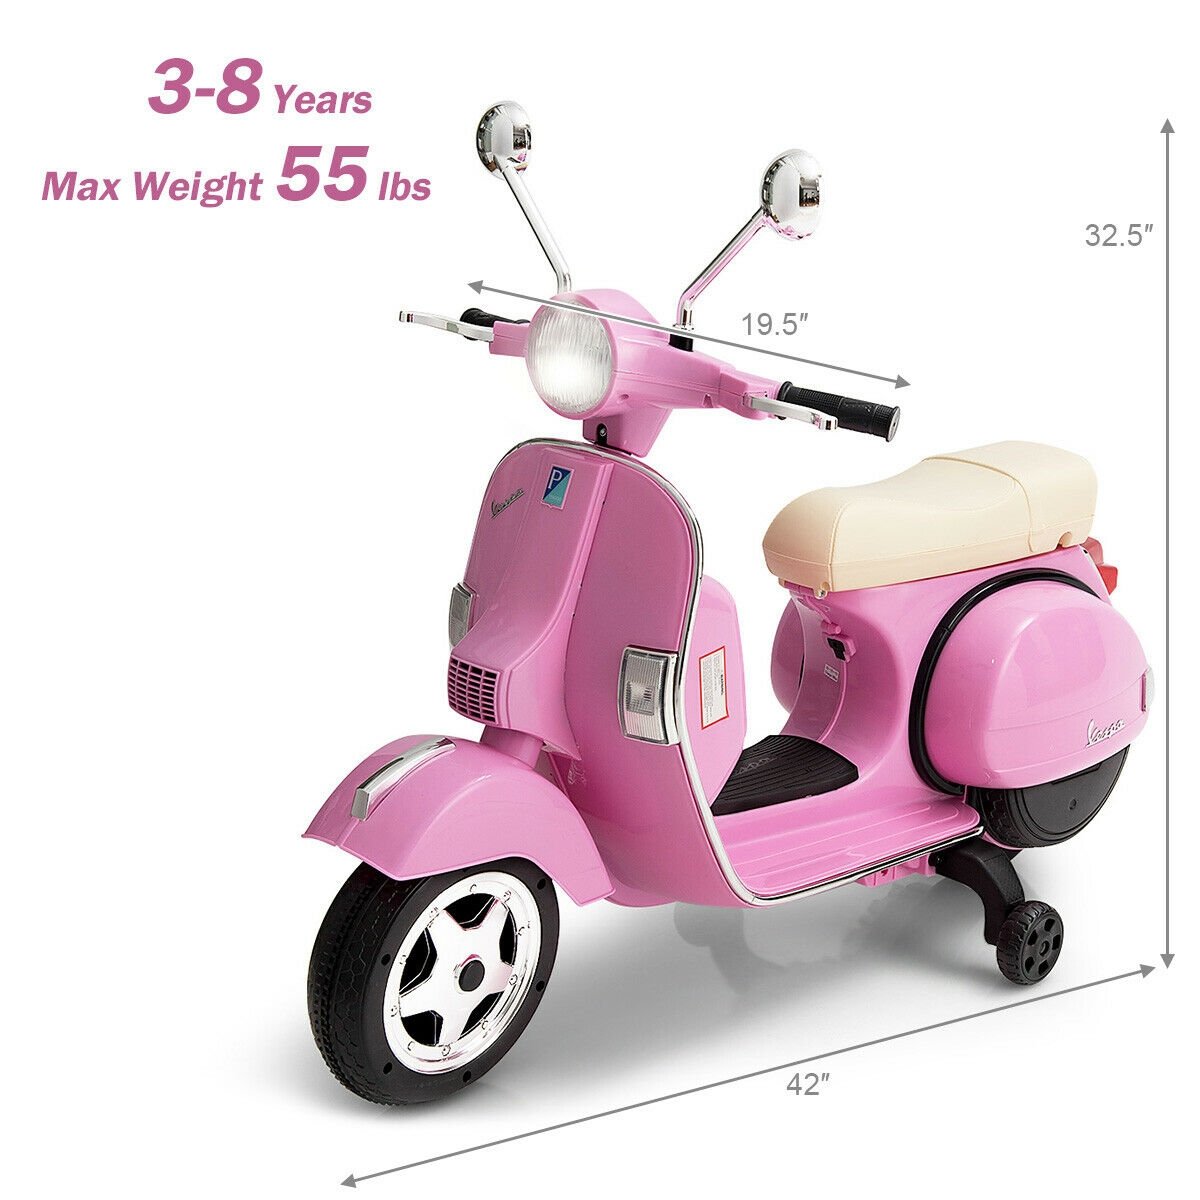 6V Kids Ride on Vespa Scooter Motorcycle with Headlight, Pink - Gallery Canada